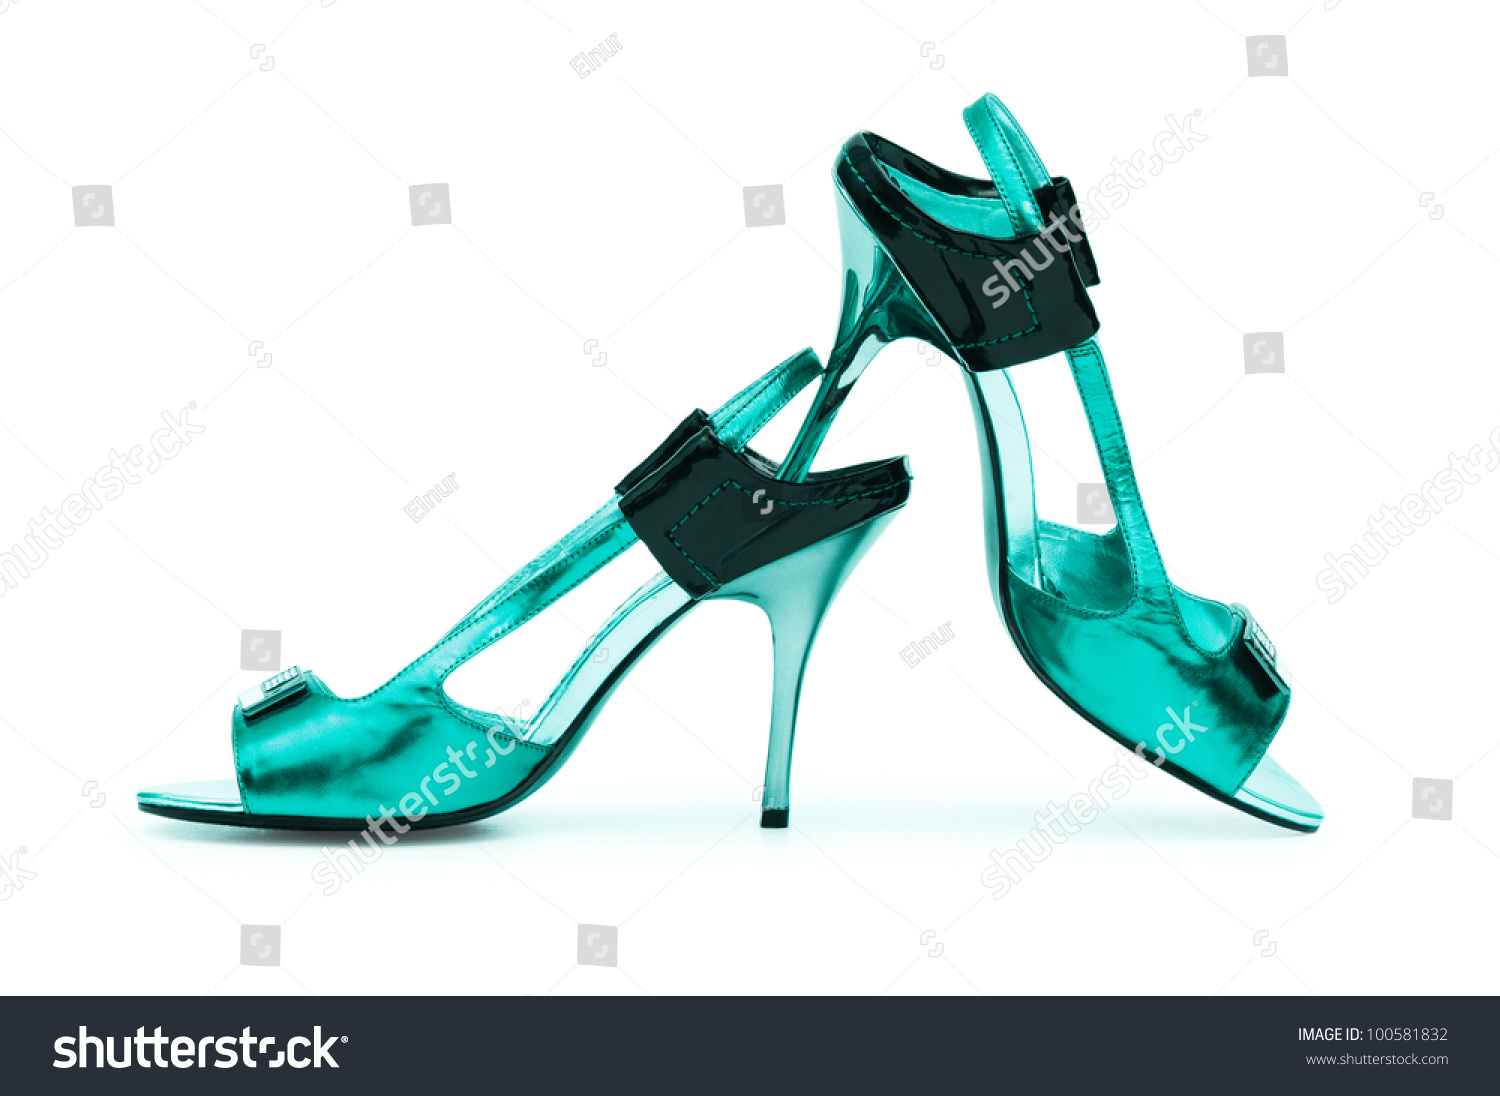 Female Shoes On White Background Stock Photo 100581832 : Shutterstock